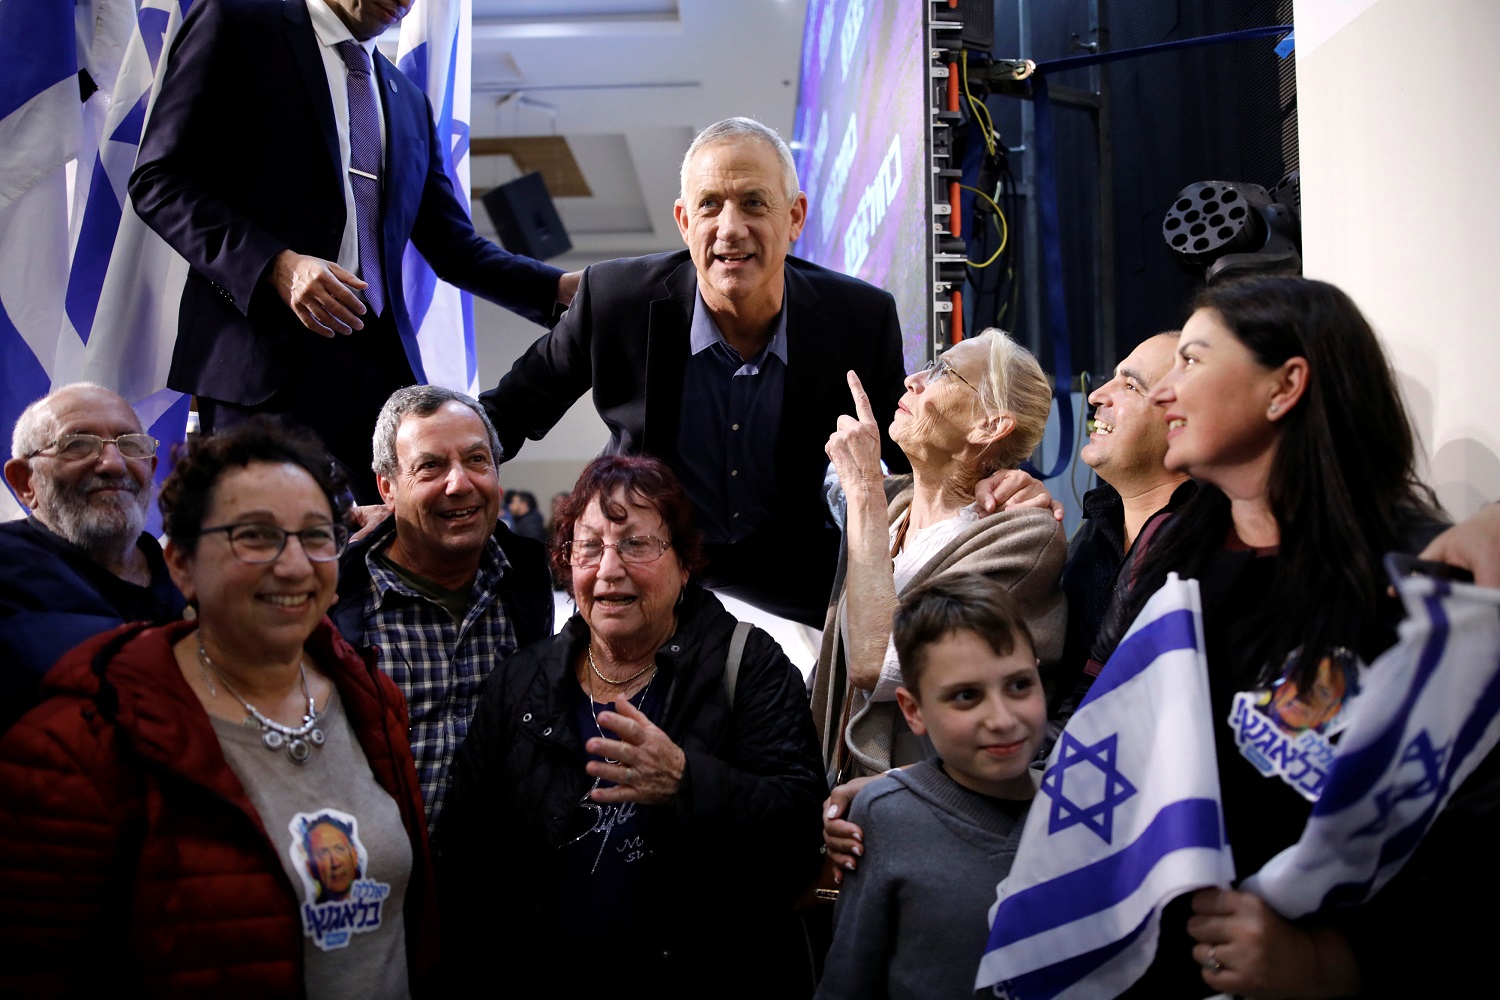 Benny Gantz with his supporters during an election campaign event in Ashkelon on 3 April 3, 2019 (Reuters)